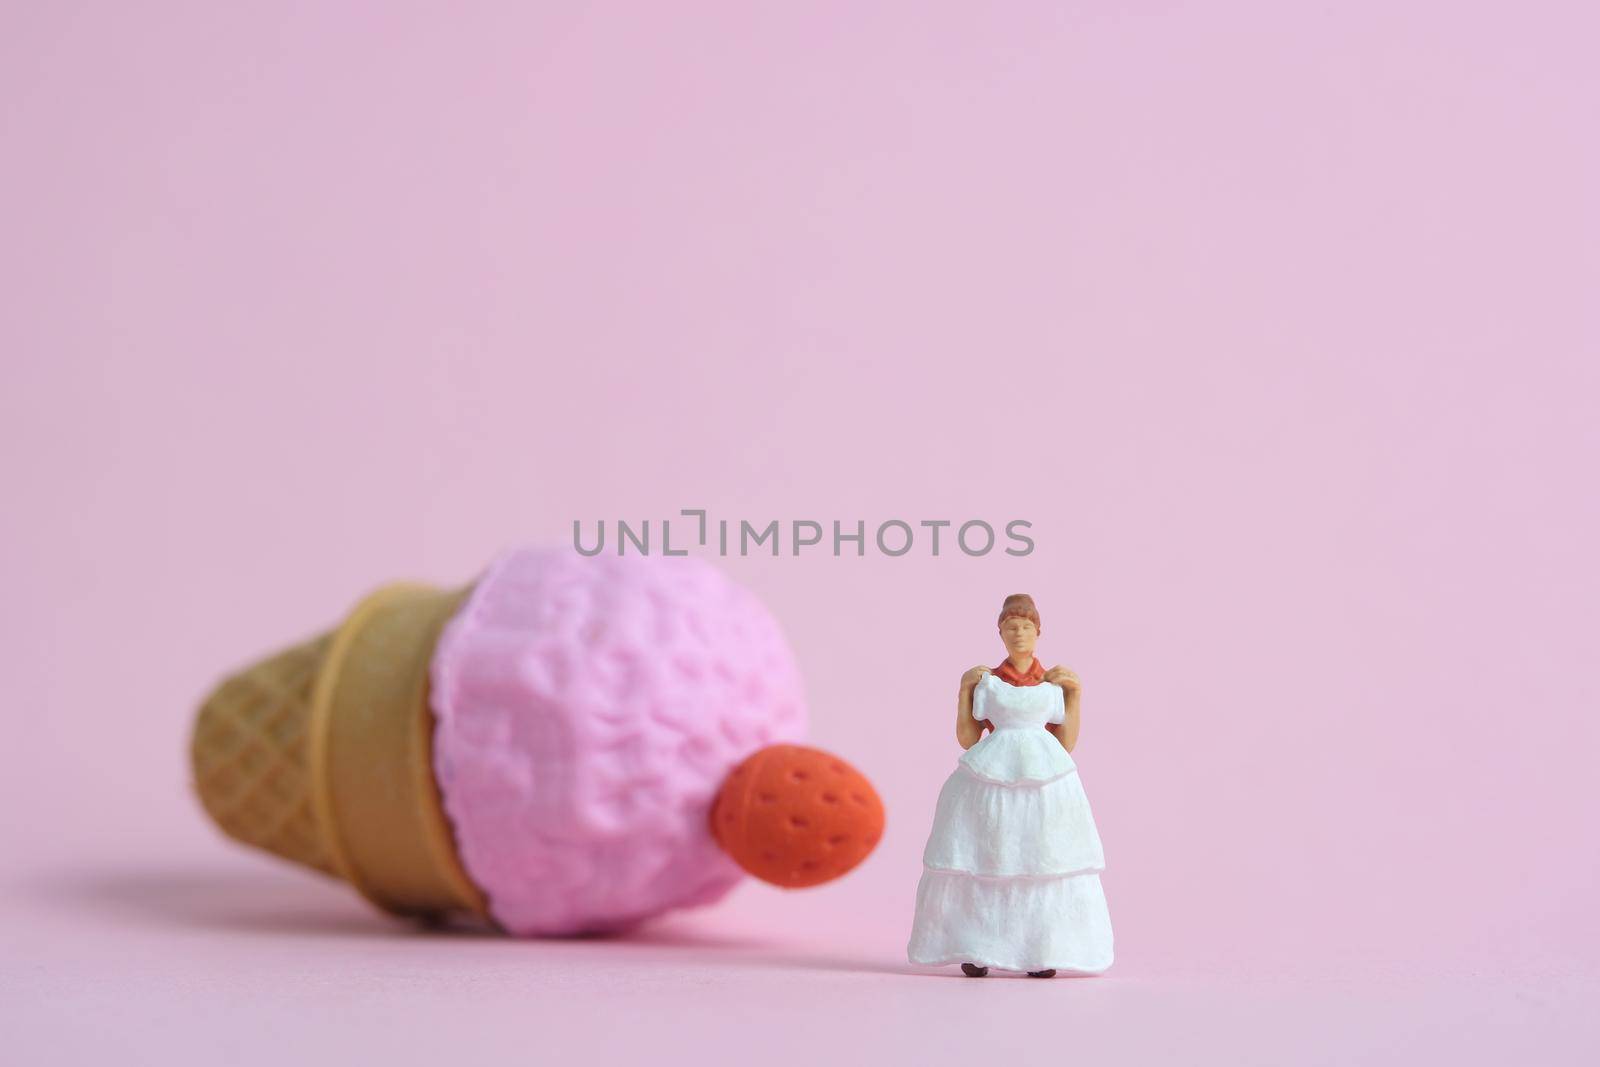 Woman dieting from ice cream and fat before wedding day concept. Miniature people toys photography, girl holding wedding dress. Image photo by Macrostud